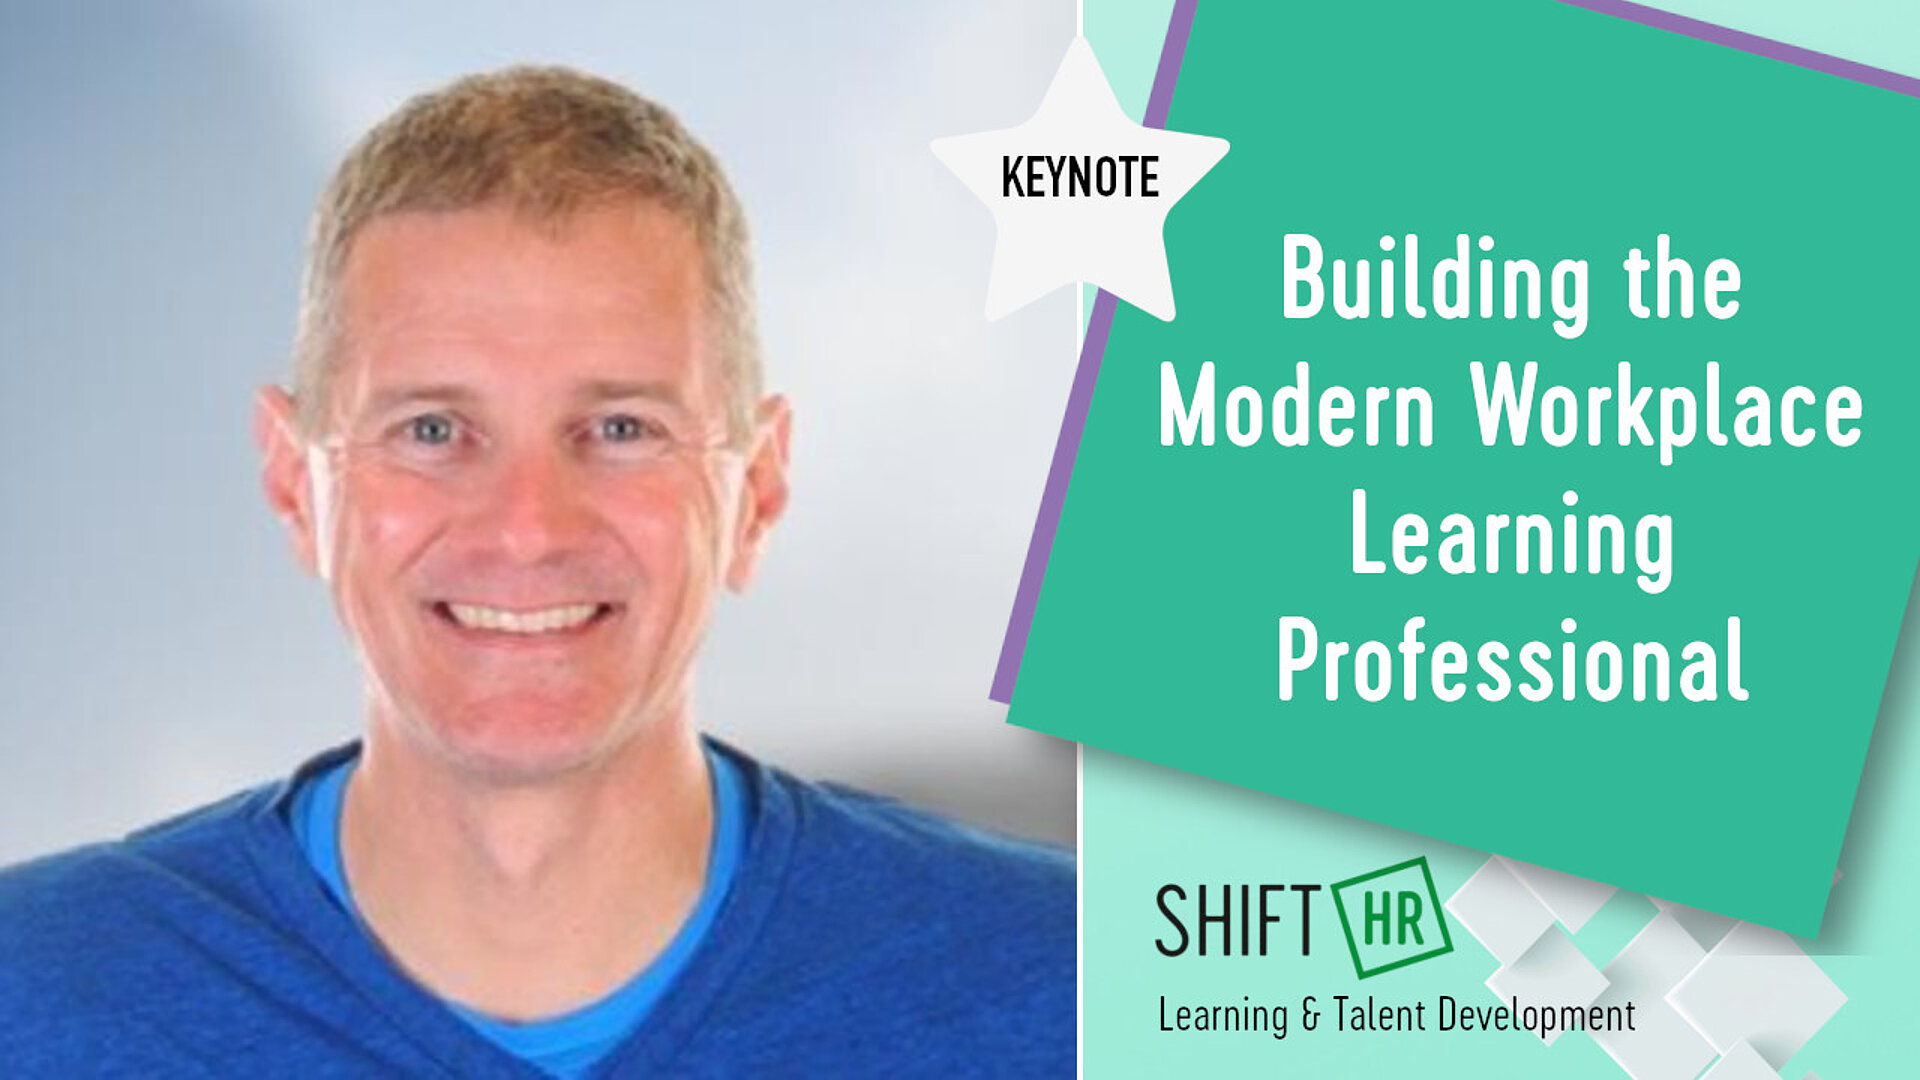 Building the Modern Workplace Learning Professional